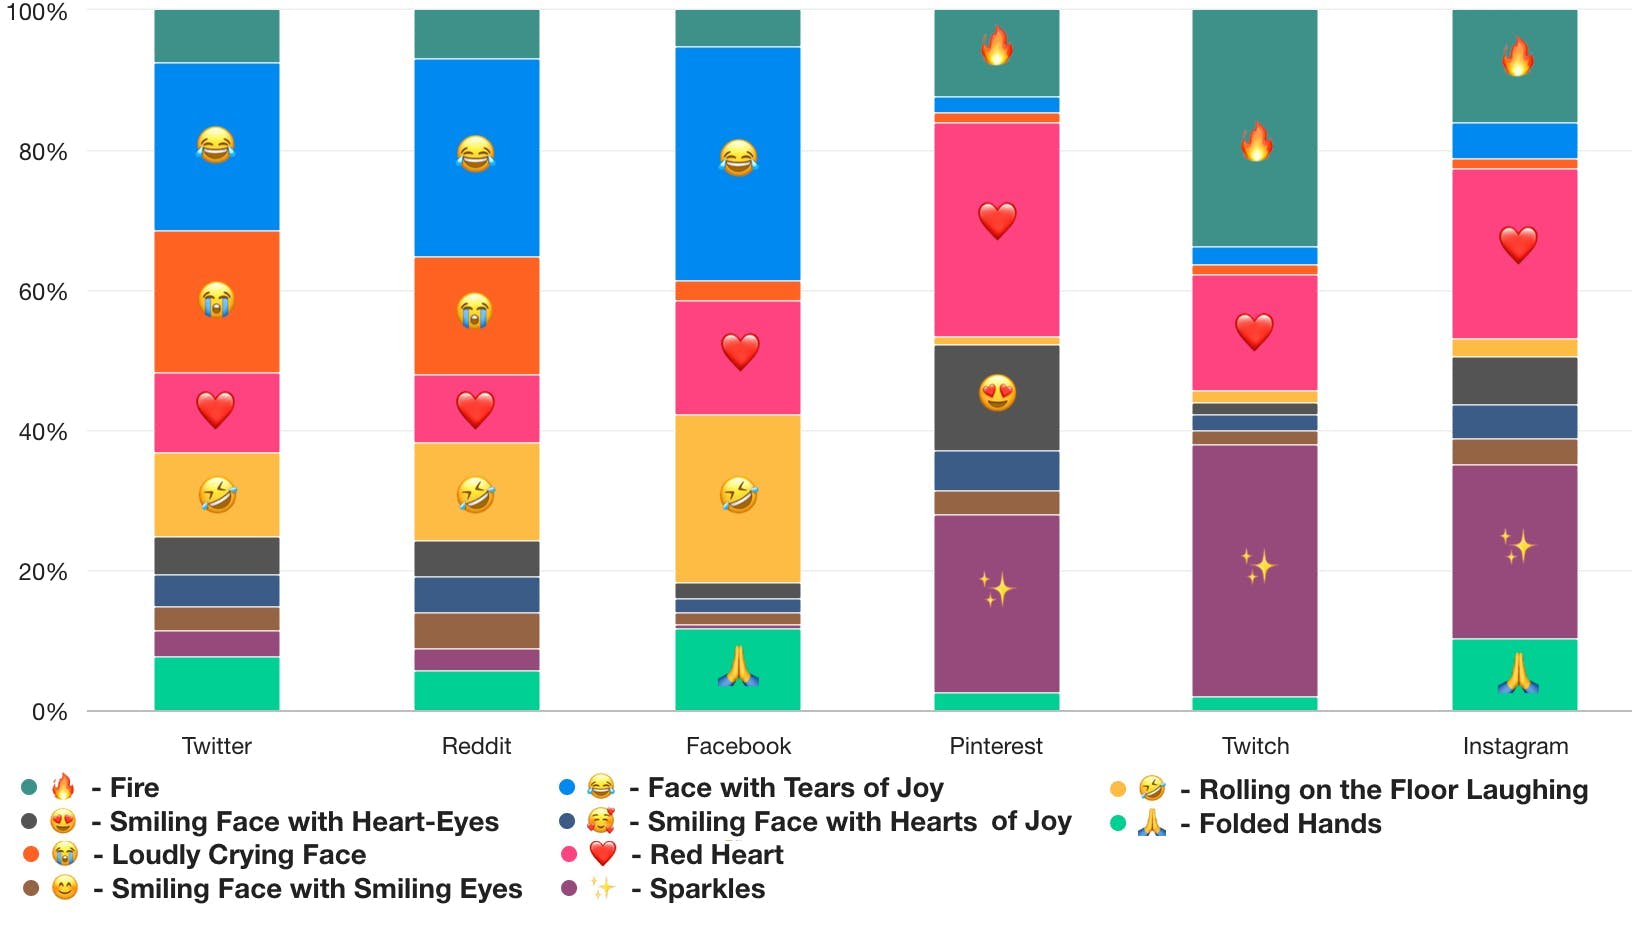 A bar chart showing each emoji's share of voice by social media platform.